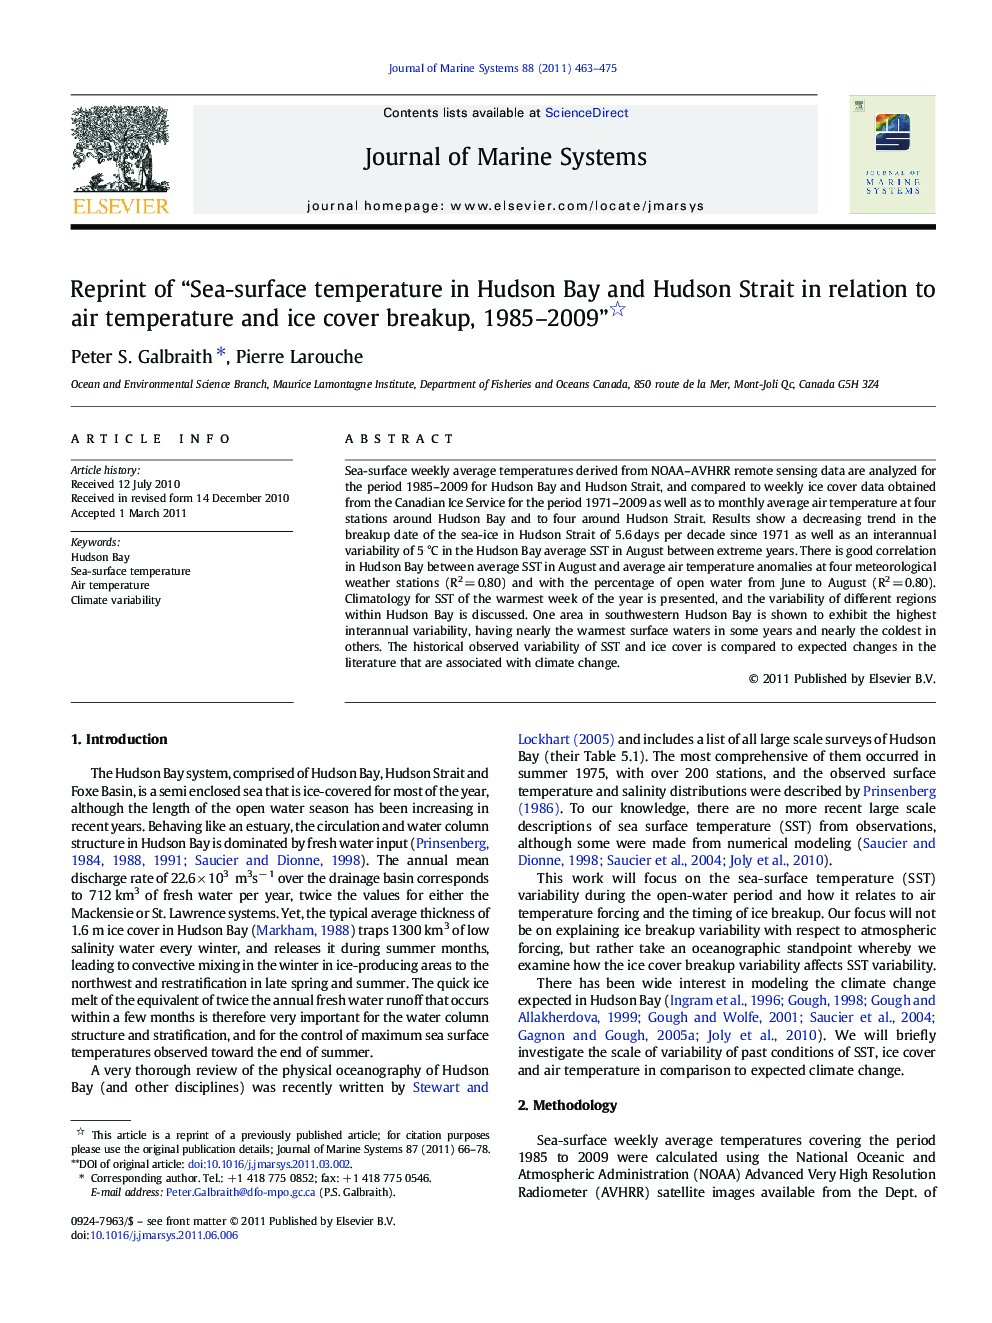 Reprint of “Sea-surface temperature in Hudson Bay and Hudson Strait in relation to air temperature and ice cover breakup, 1985–2009” 